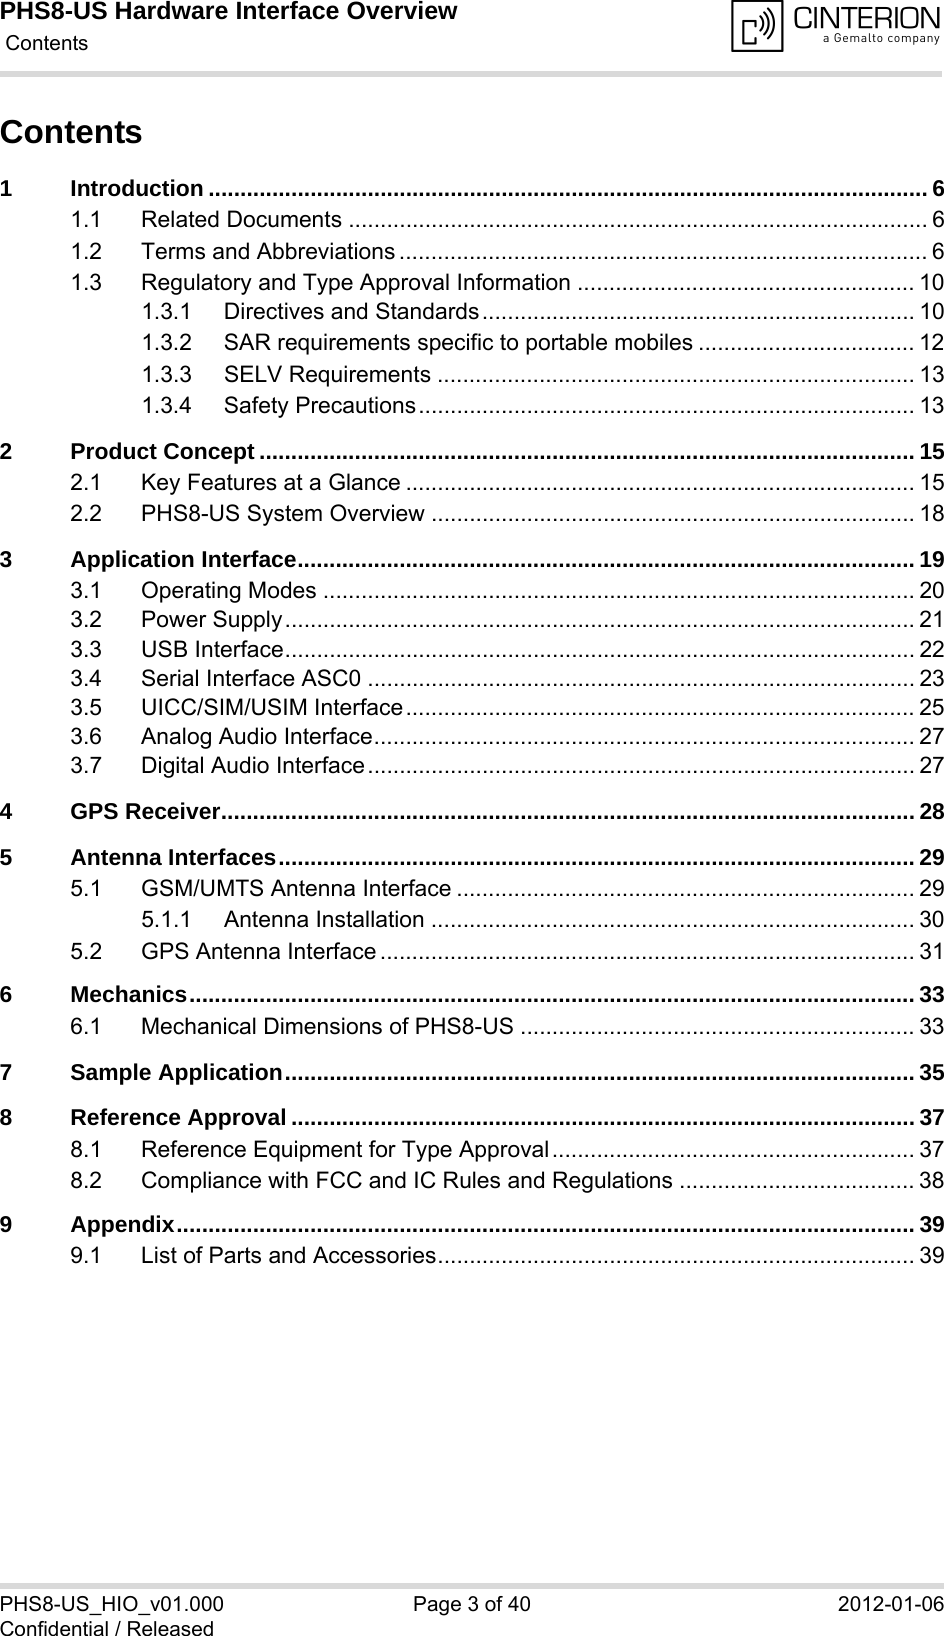 PHS8-US Hardware Interface Overview Contents40PHS8-US_HIO_v01.000 Page 3 of 40 2012-01-06Confidential / ReleasedContents1 Introduction ................................................................................................................. 61.1 Related Documents ........................................................................................... 61.2 Terms and Abbreviations ................................................................................... 61.3 Regulatory and Type Approval Information ..................................................... 101.3.1 Directives and Standards.................................................................... 101.3.2 SAR requirements specific to portable mobiles .................................. 121.3.3 SELV Requirements ........................................................................... 131.3.4 Safety Precautions.............................................................................. 132 Product Concept ....................................................................................................... 152.1 Key Features at a Glance ................................................................................ 152.2 PHS8-US System Overview ............................................................................ 183 Application Interface................................................................................................. 193.1 Operating Modes ............................................................................................. 203.2 Power Supply................................................................................................... 213.3 USB Interface................................................................................................... 223.4 Serial Interface ASC0 ...................................................................................... 233.5 UICC/SIM/USIM Interface................................................................................ 253.6 Analog Audio Interface..................................................................................... 273.7 Digital Audio Interface...................................................................................... 274 GPS Receiver............................................................................................................. 285 Antenna Interfaces.................................................................................................... 295.1 GSM/UMTS Antenna Interface ........................................................................ 295.1.1 Antenna Installation ............................................................................ 305.2 GPS Antenna Interface .................................................................................... 316 Mechanics.................................................................................................................. 336.1 Mechanical Dimensions of PHS8-US .............................................................. 337 Sample Application................................................................................................... 358 Reference Approval .................................................................................................. 378.1 Reference Equipment for Type Approval......................................................... 378.2 Compliance with FCC and IC Rules and Regulations ..................................... 389 Appendix.................................................................................................................... 399.1 List of Parts and Accessories........................................................................... 39